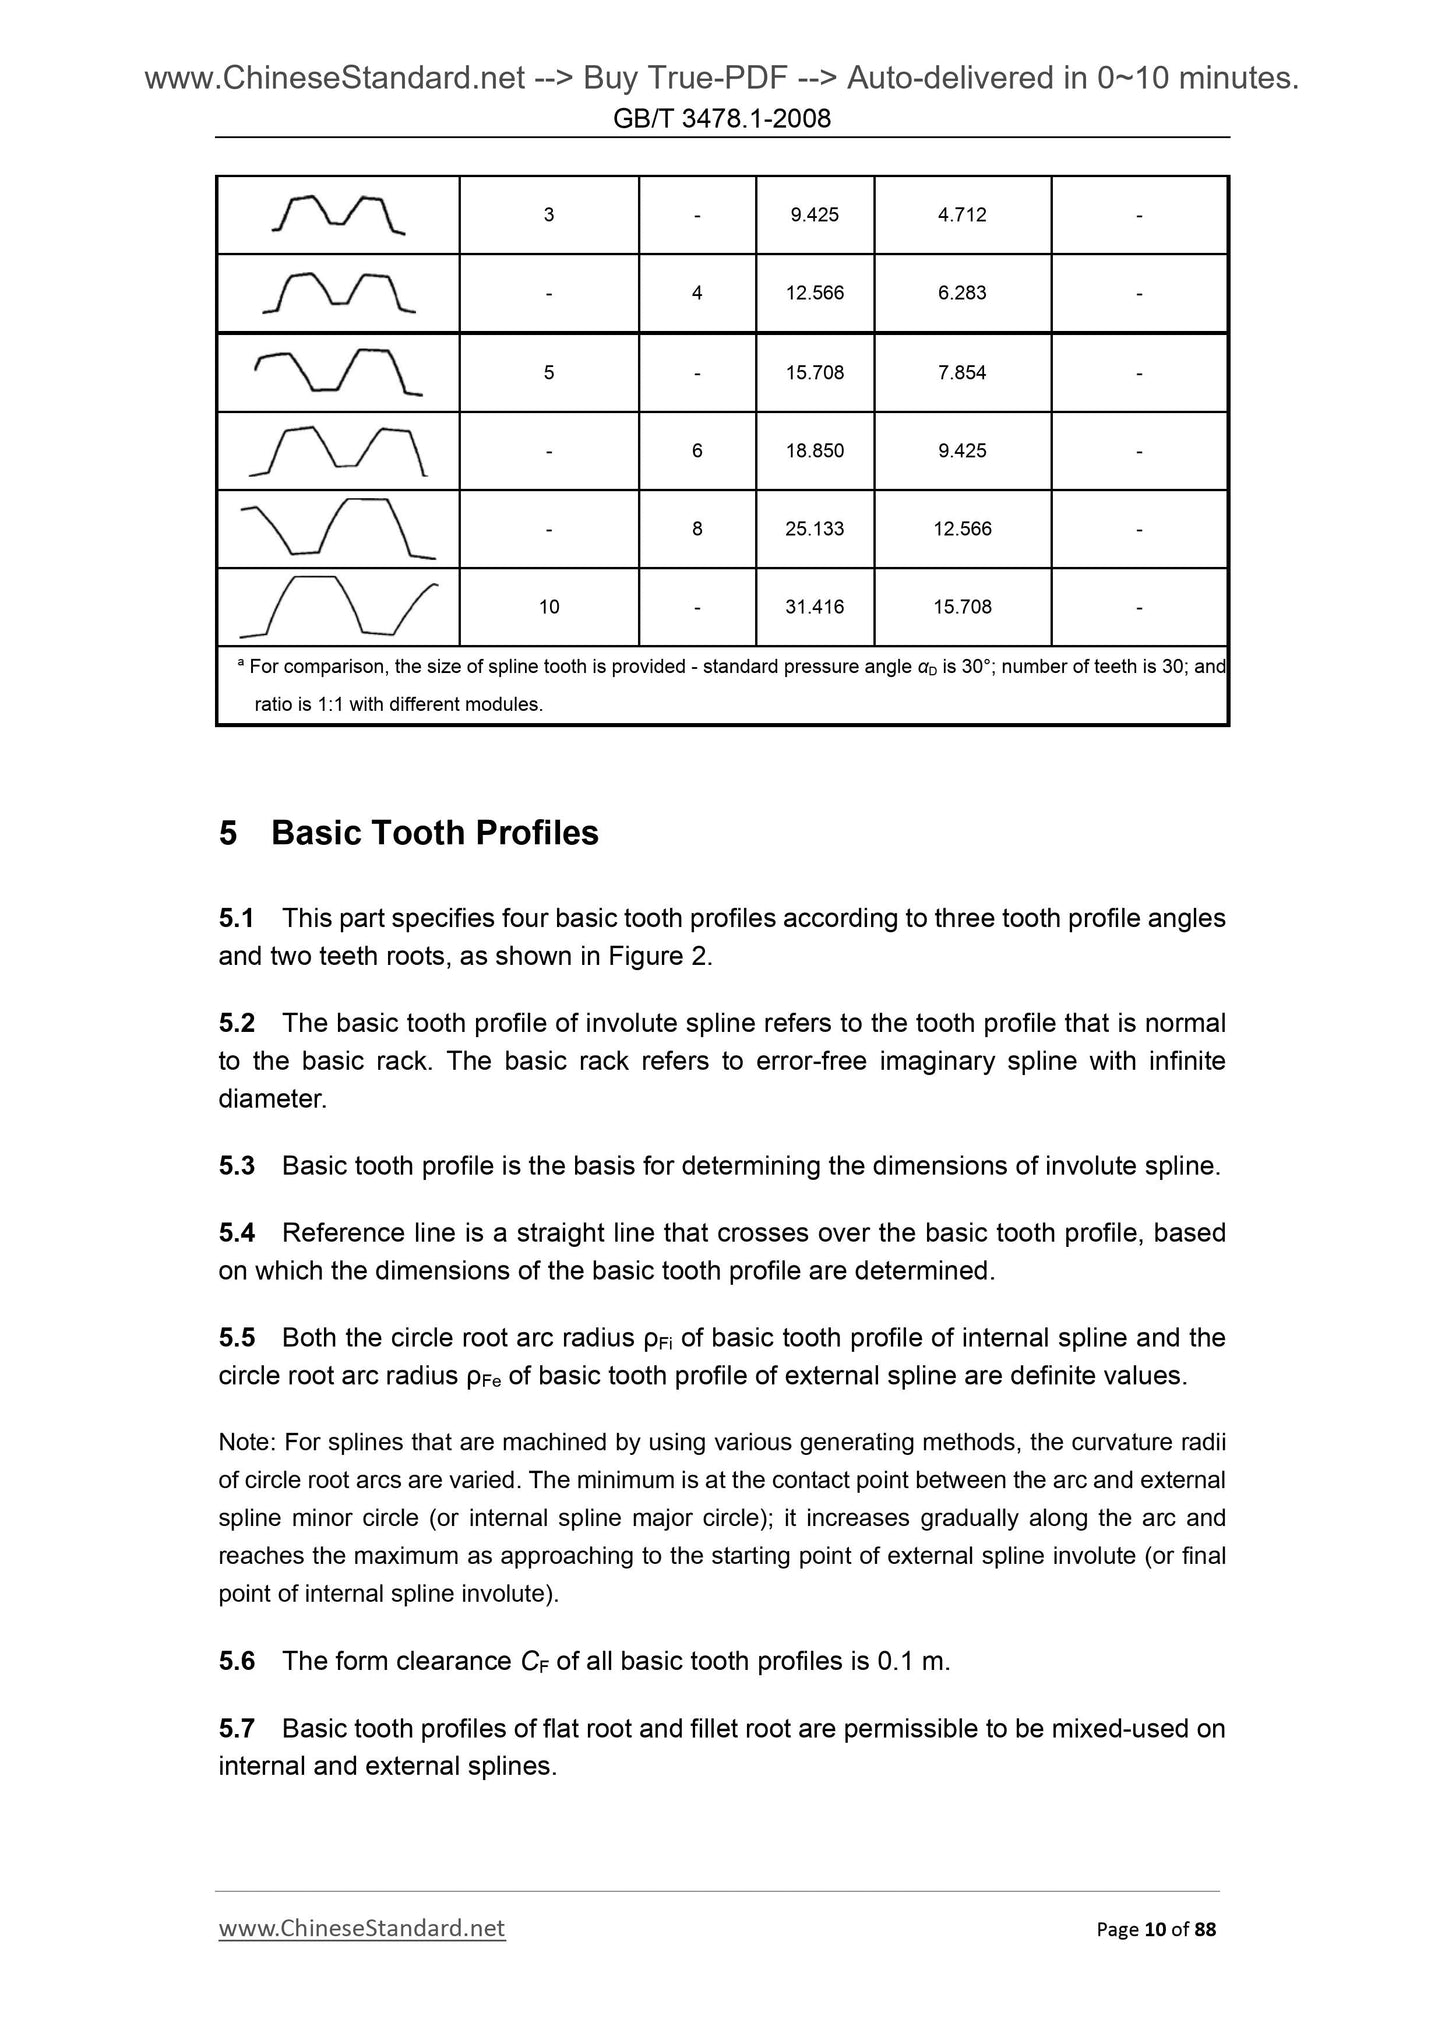 GB/T 3478.1-2008 Page 7